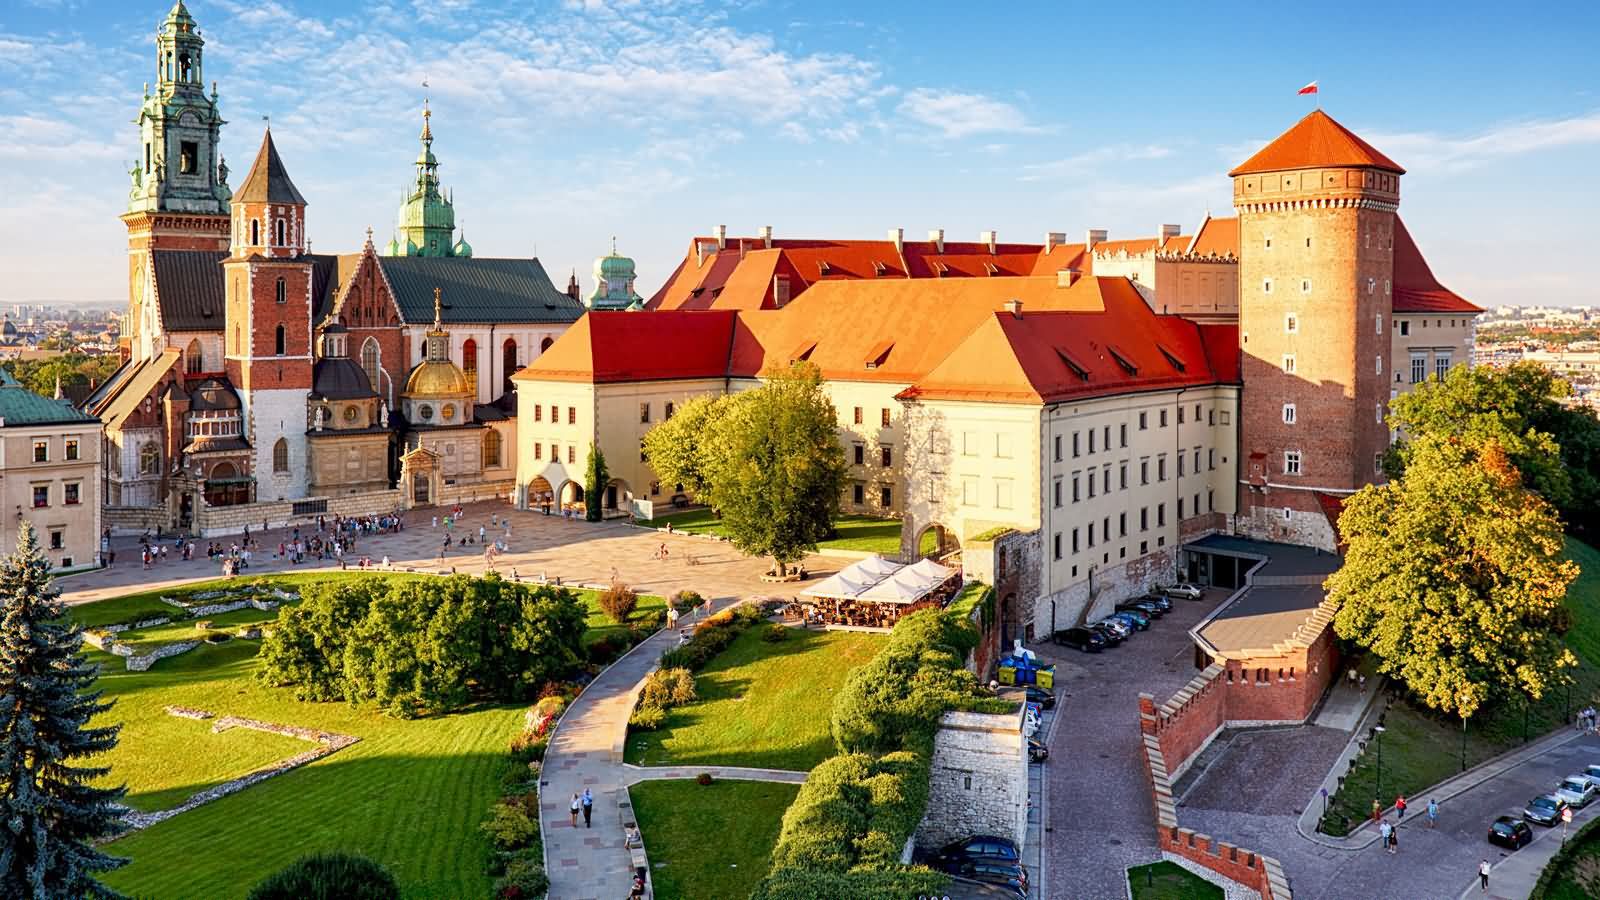 81+ Most Amazing Wawel Castle Pictures And Images